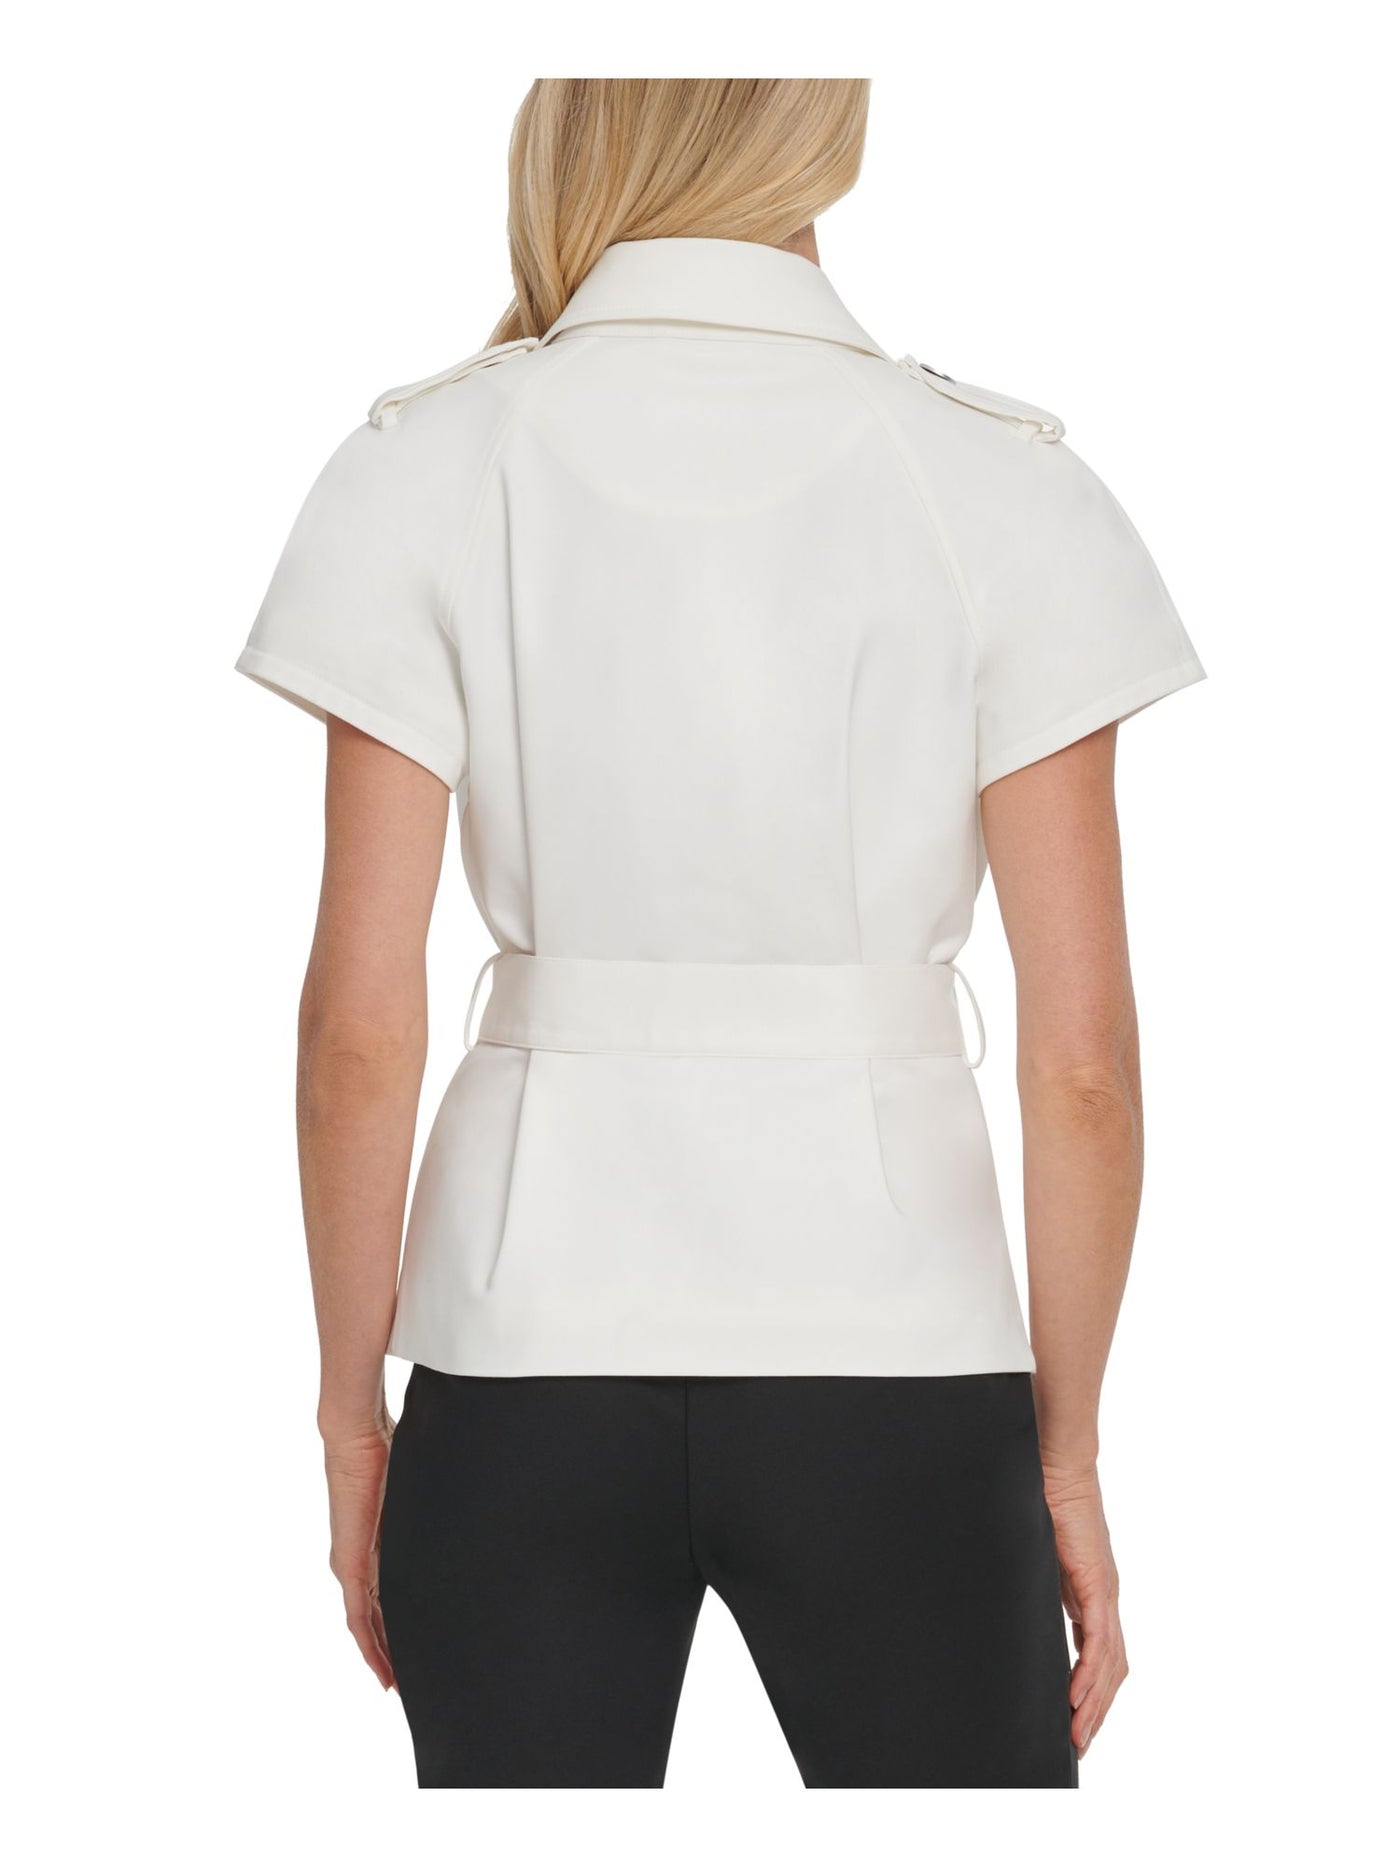 DKNY Womens Belted Cap Sleeve Collared Wrap Top